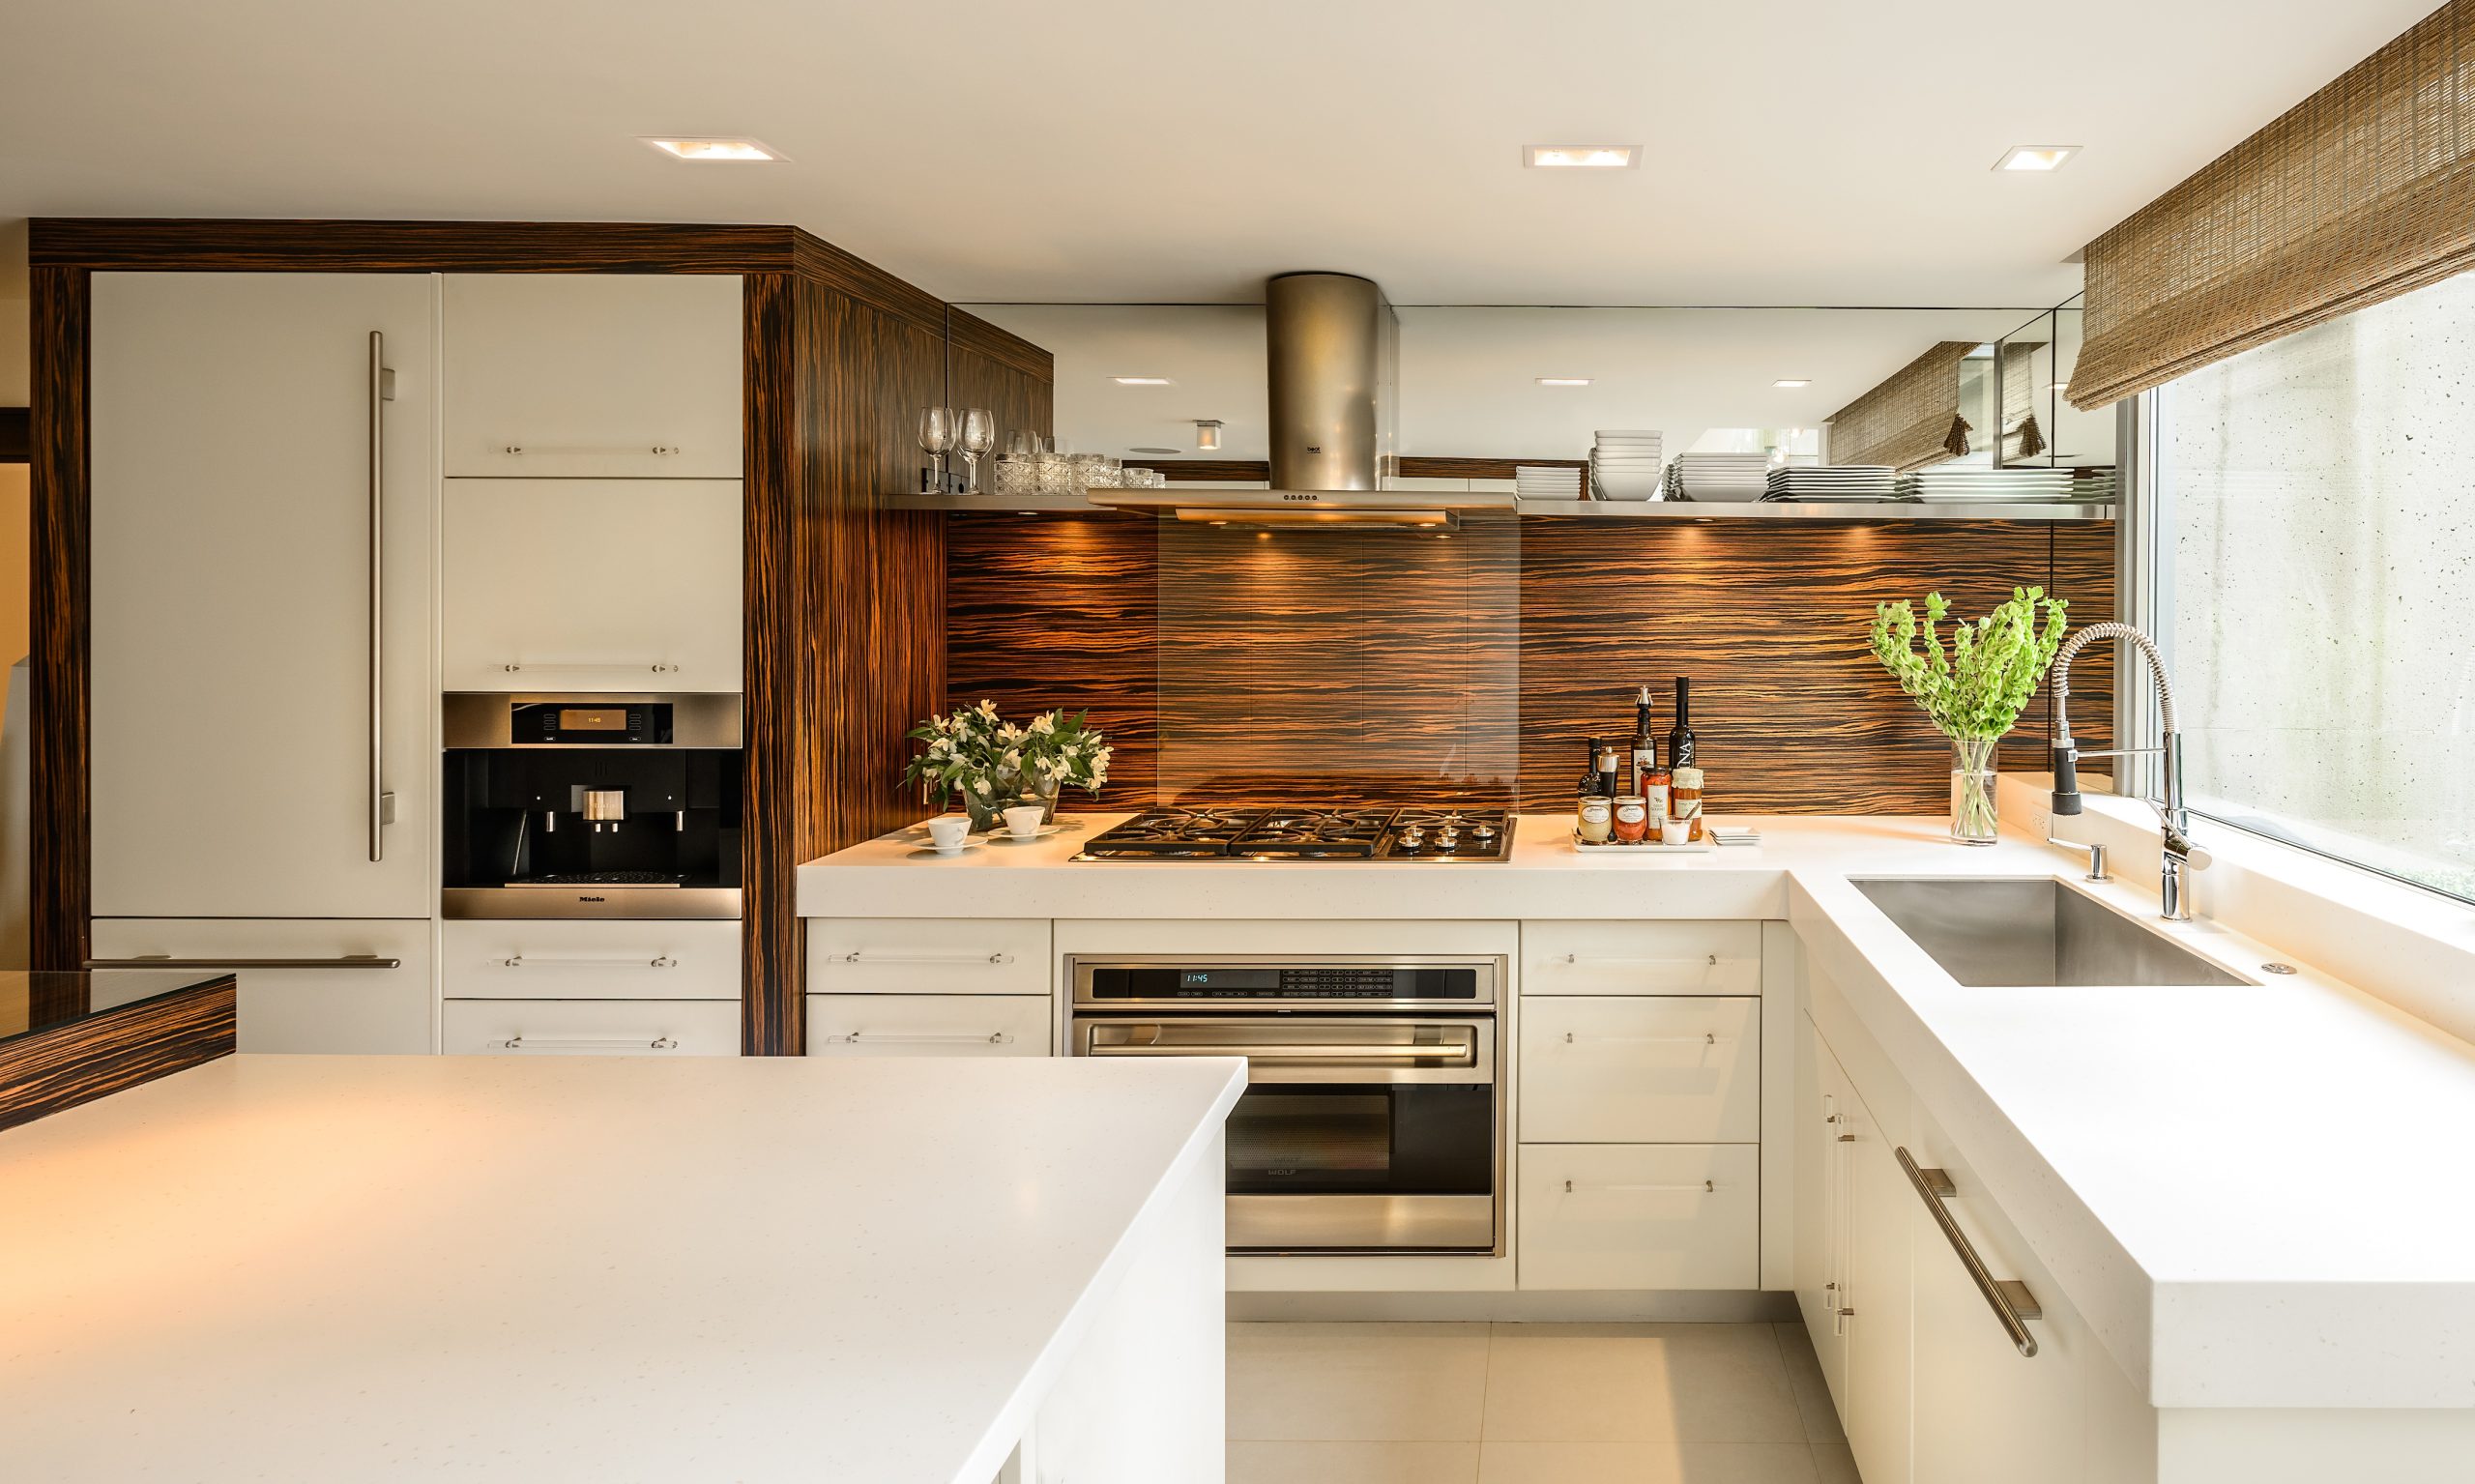 What Are The Seven Principles In Designing A Kitchen Layout